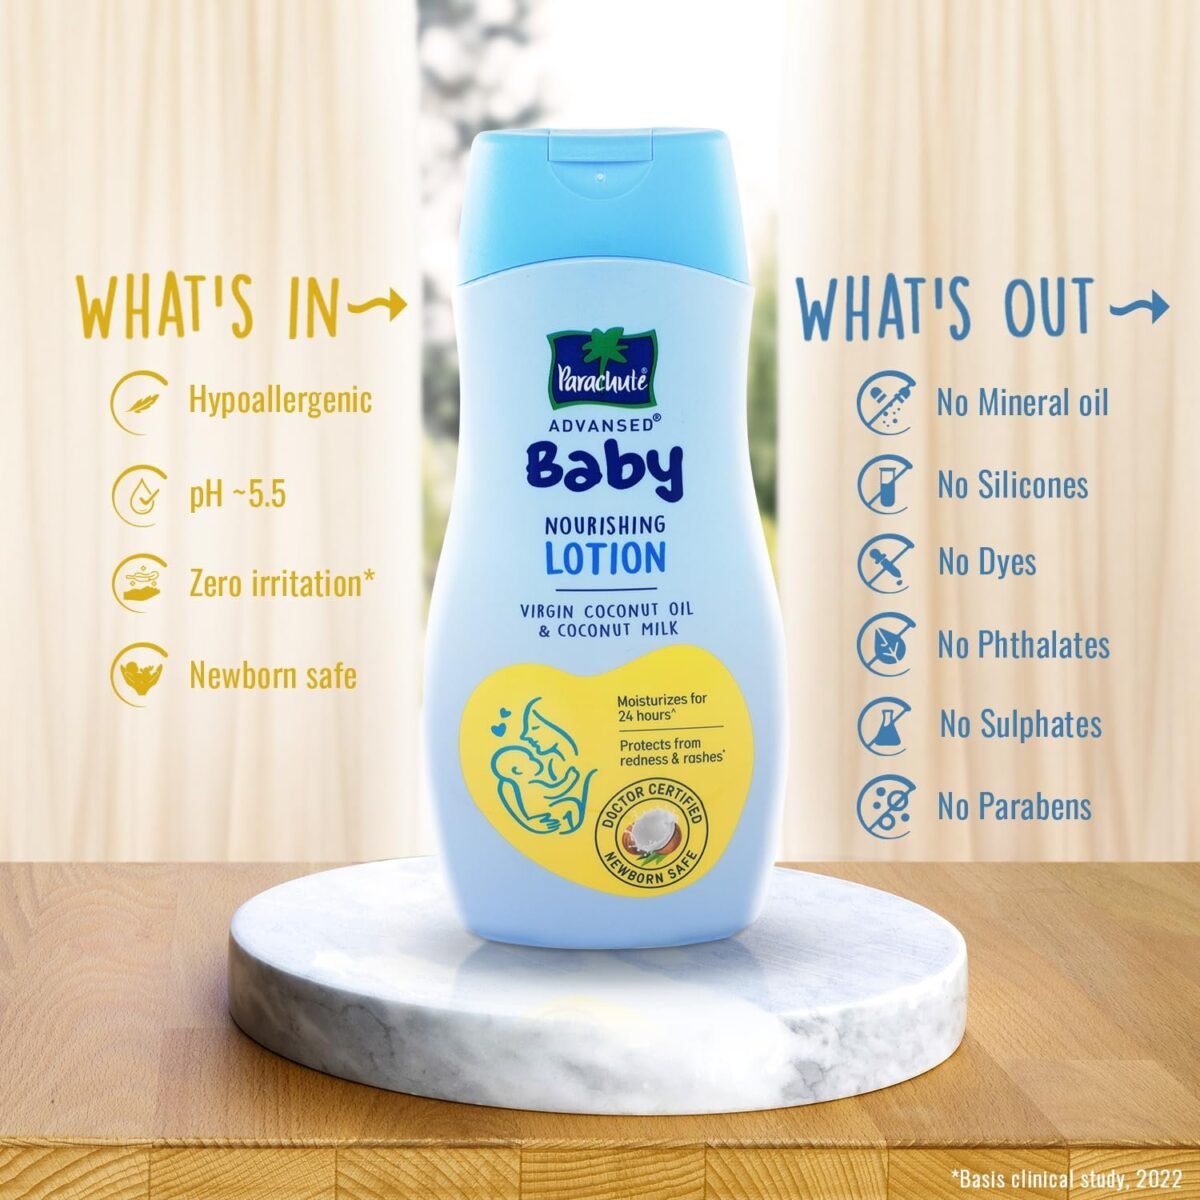 Parachute Advansed Baby Lotion For New Born Babies|Doctor Certified|Virgin Coconut Oil & Coconut Milk|Ph 5.5|24 Hour